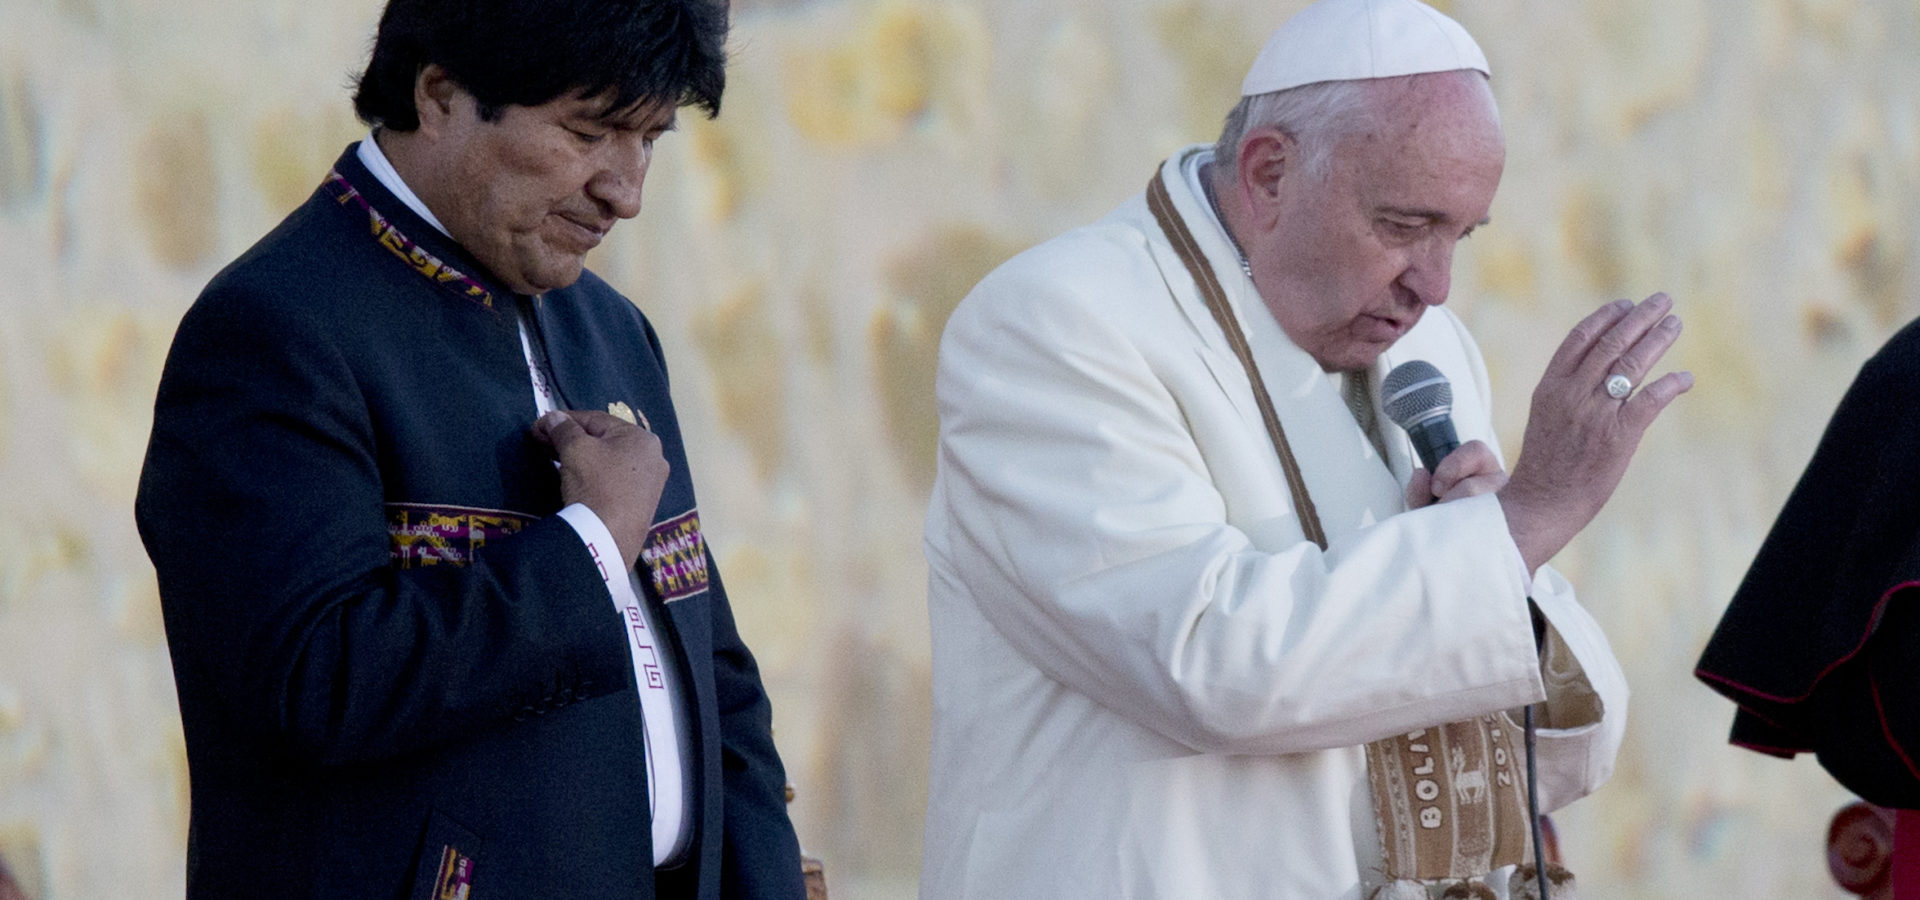 Pope Francis and Bolivia's President Evo Morales pray upon arrival to El Alto International airport in El Alto, Bolivia, Wednesday, July 8, 2015. The pouch Francis is wearing around his neck was given to him by Morales. It's woven of alpaca with indigenous trimmings and traditionally used by people in the Andes to hold coca leaves, which they chew to ward off the ill effects of extreme altitude. (AP Photo/Eduardo Verdugo)